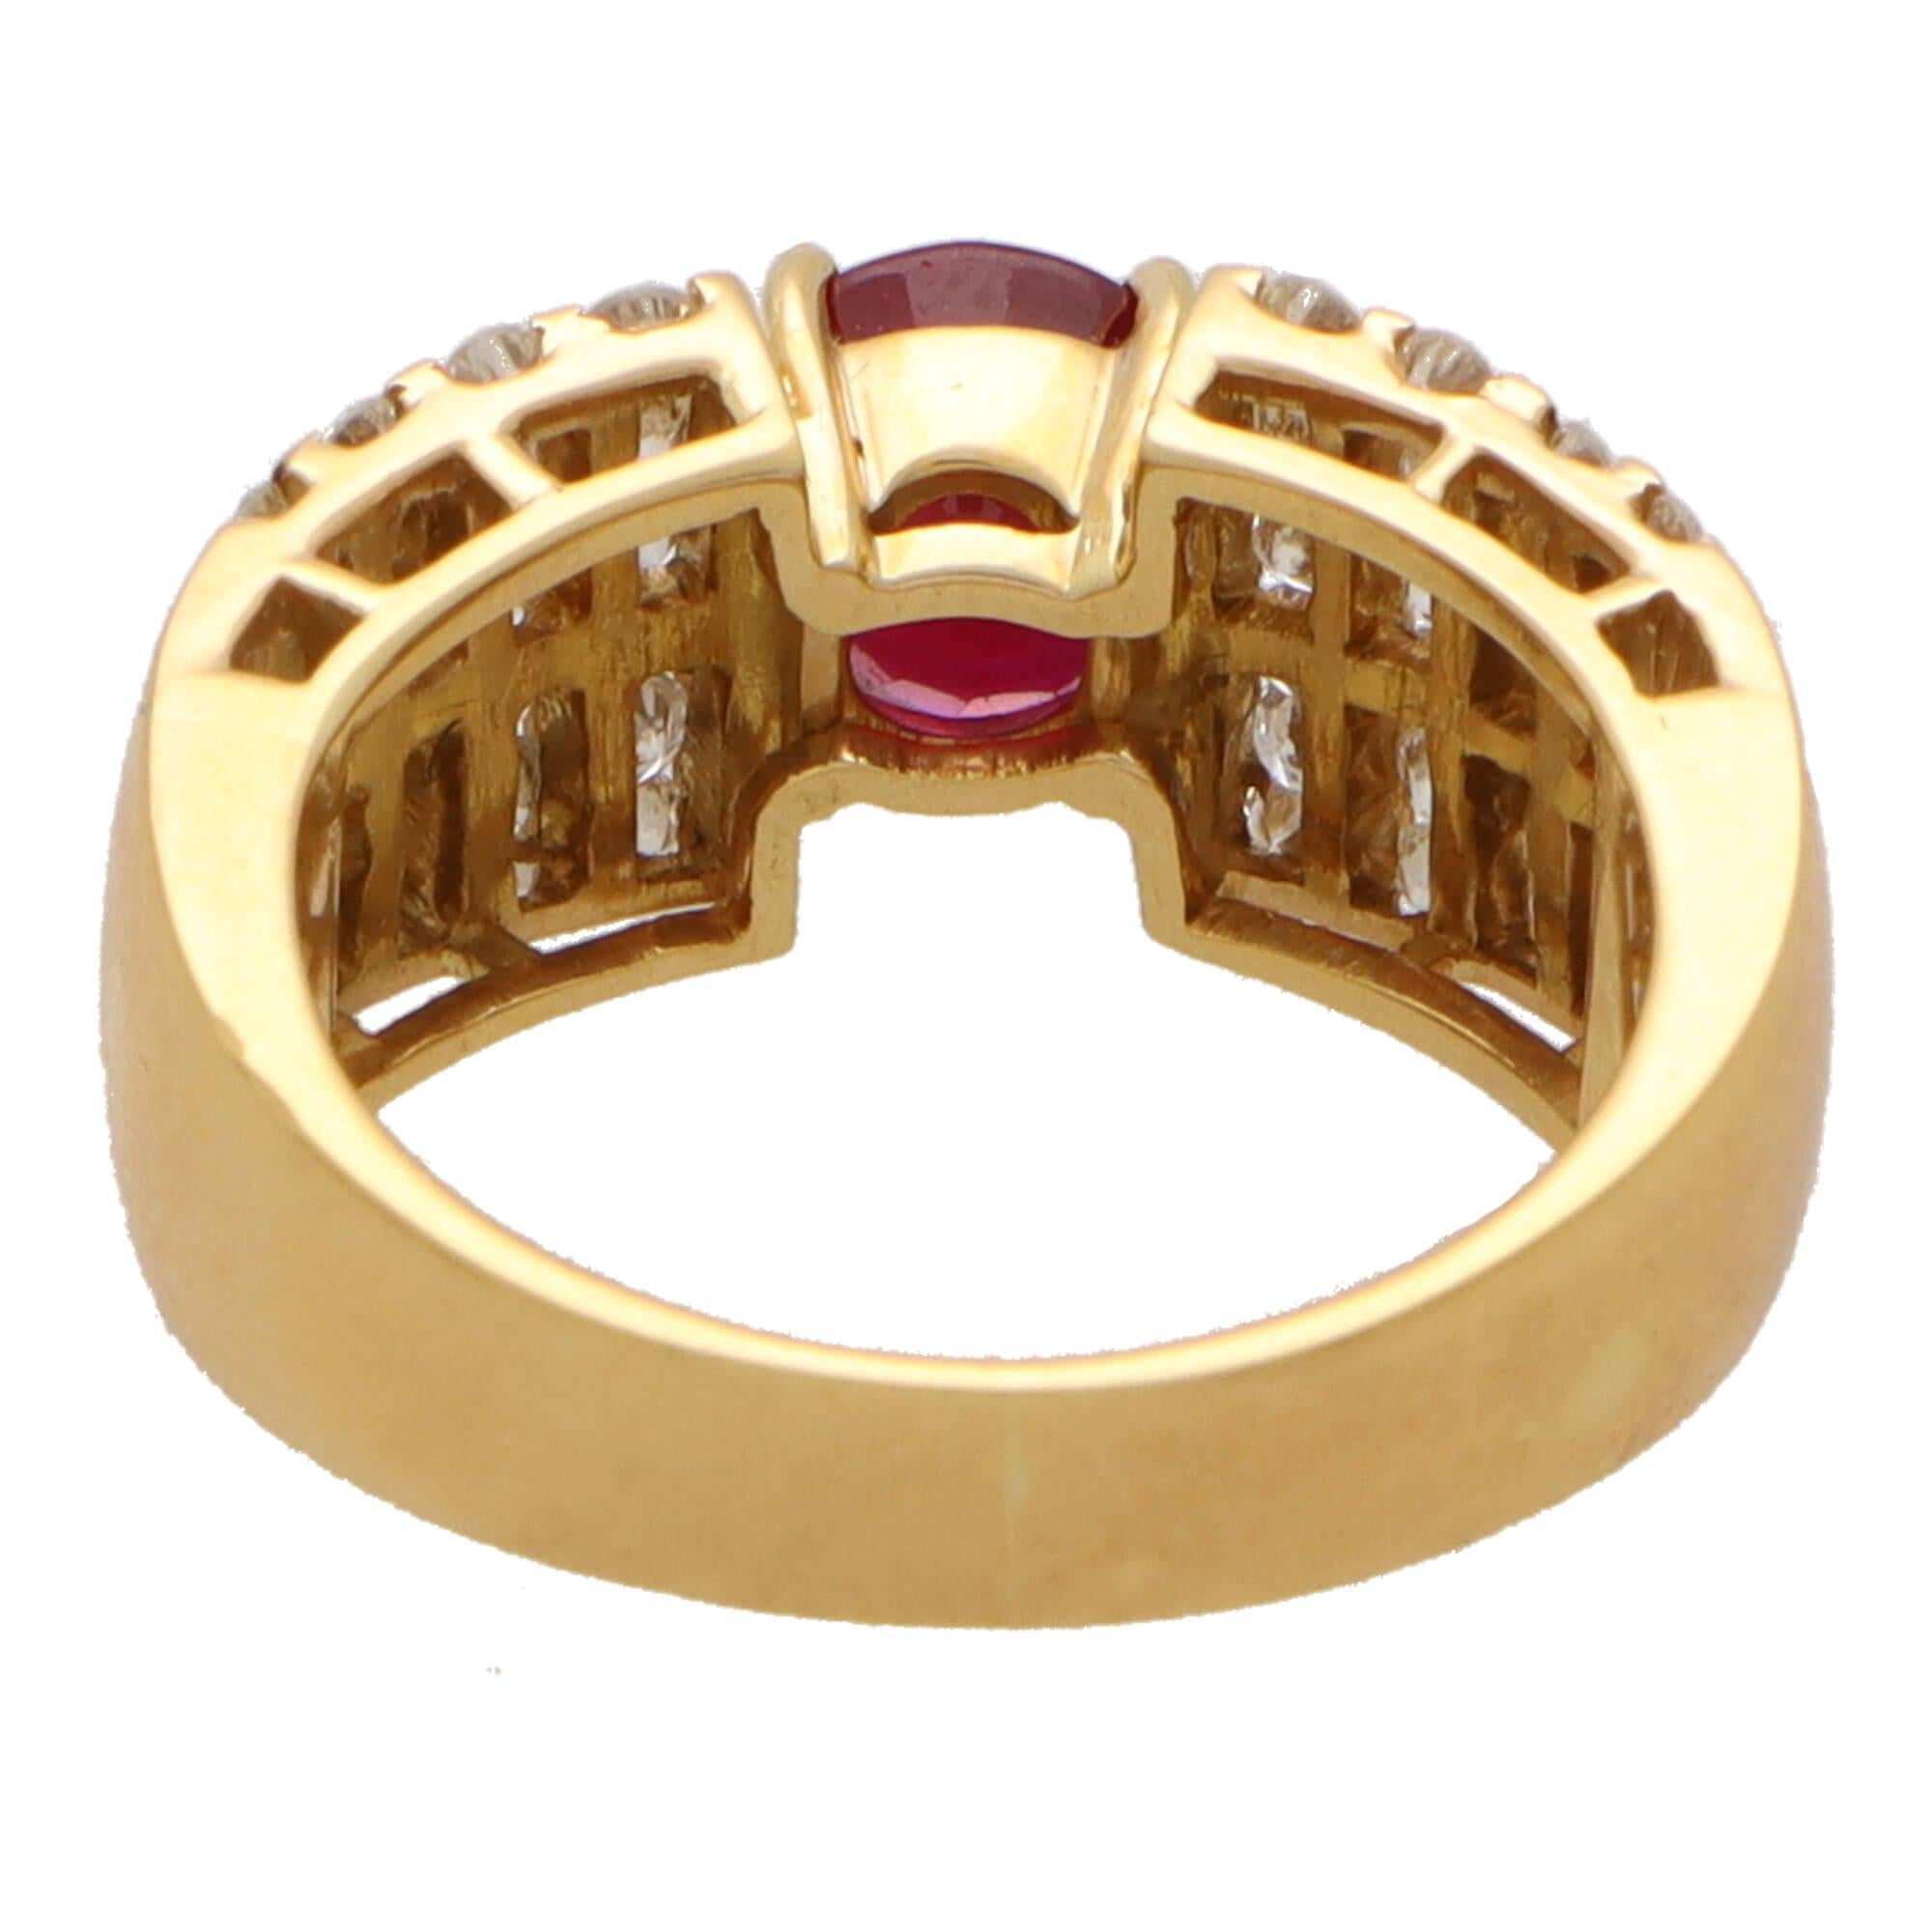 Oval Cut Vintage Ruby and Diamond Dress Ring in 18k Yellow Gold